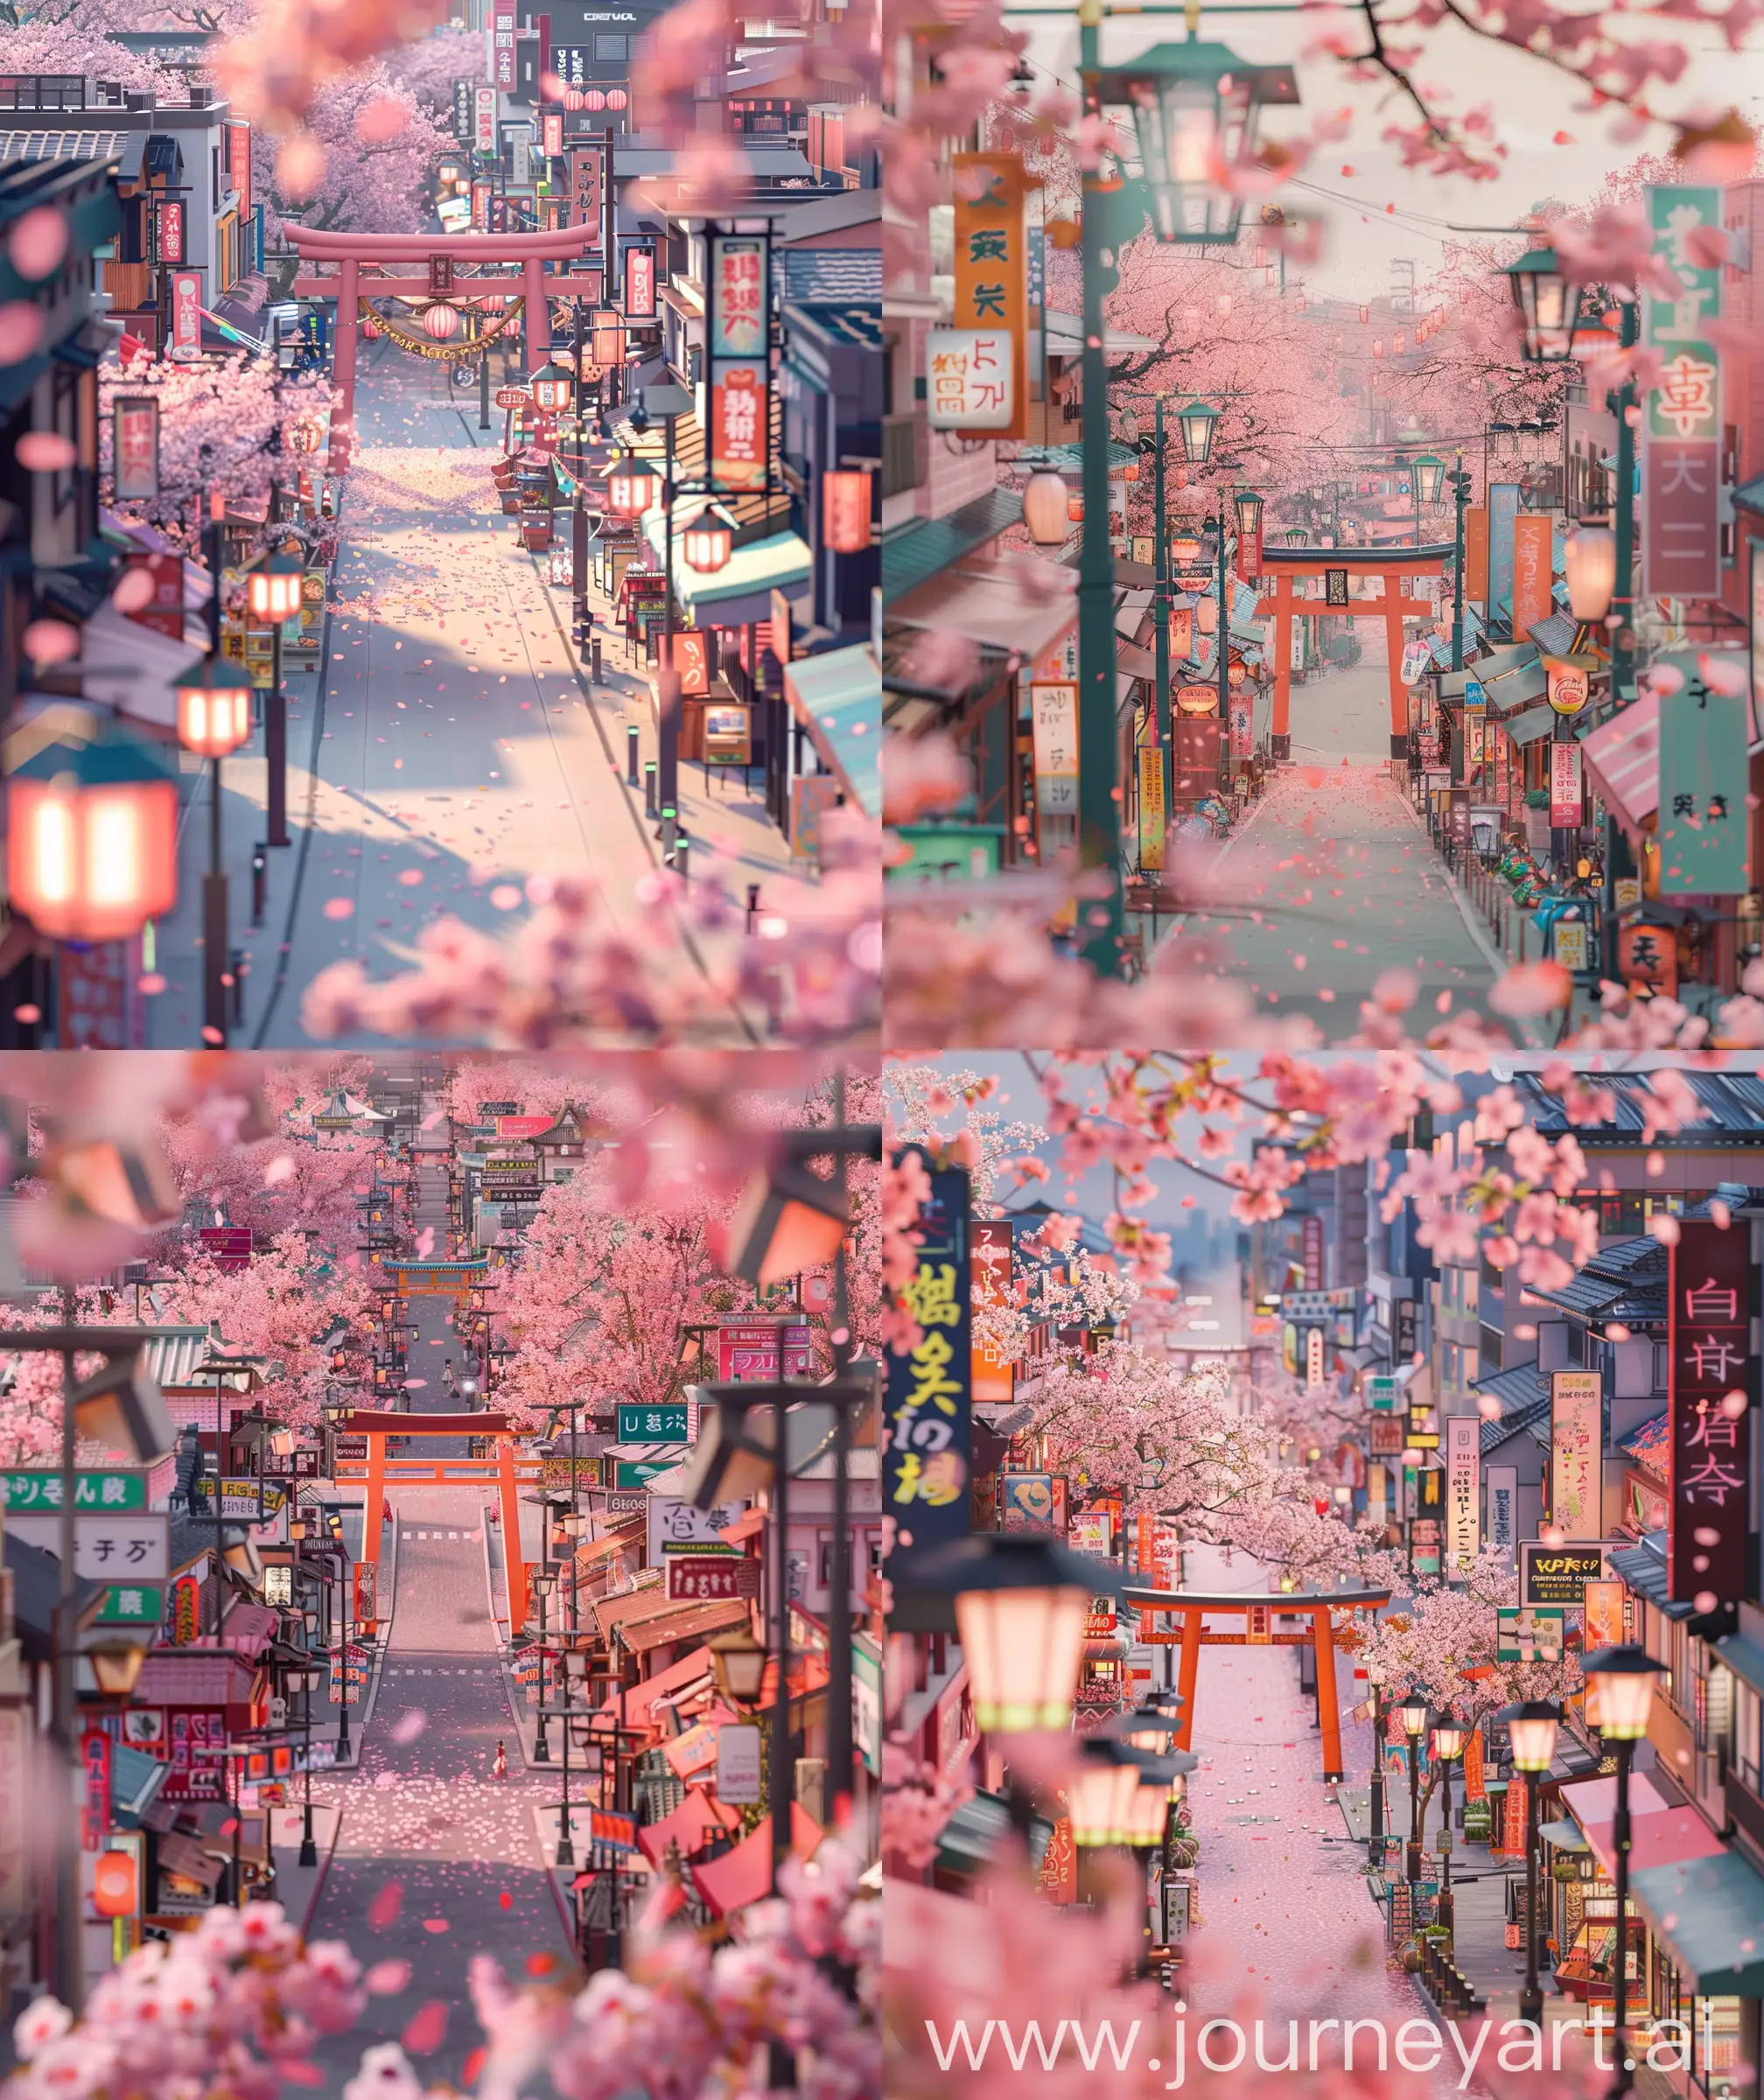 Anime scenary, illustration, downtown street, cherry blossom, many shop, streets, lamp, vibrant look, tori gate, day time, light pink gradient, cherry blossom petals scattered around, slightly tilted image, many sign board, vibrant shop across street, cherry blossom decoration with tori gate, ultra HD, illustration, High quality, no blurry image, no hyperrealistic --ar 27:32 